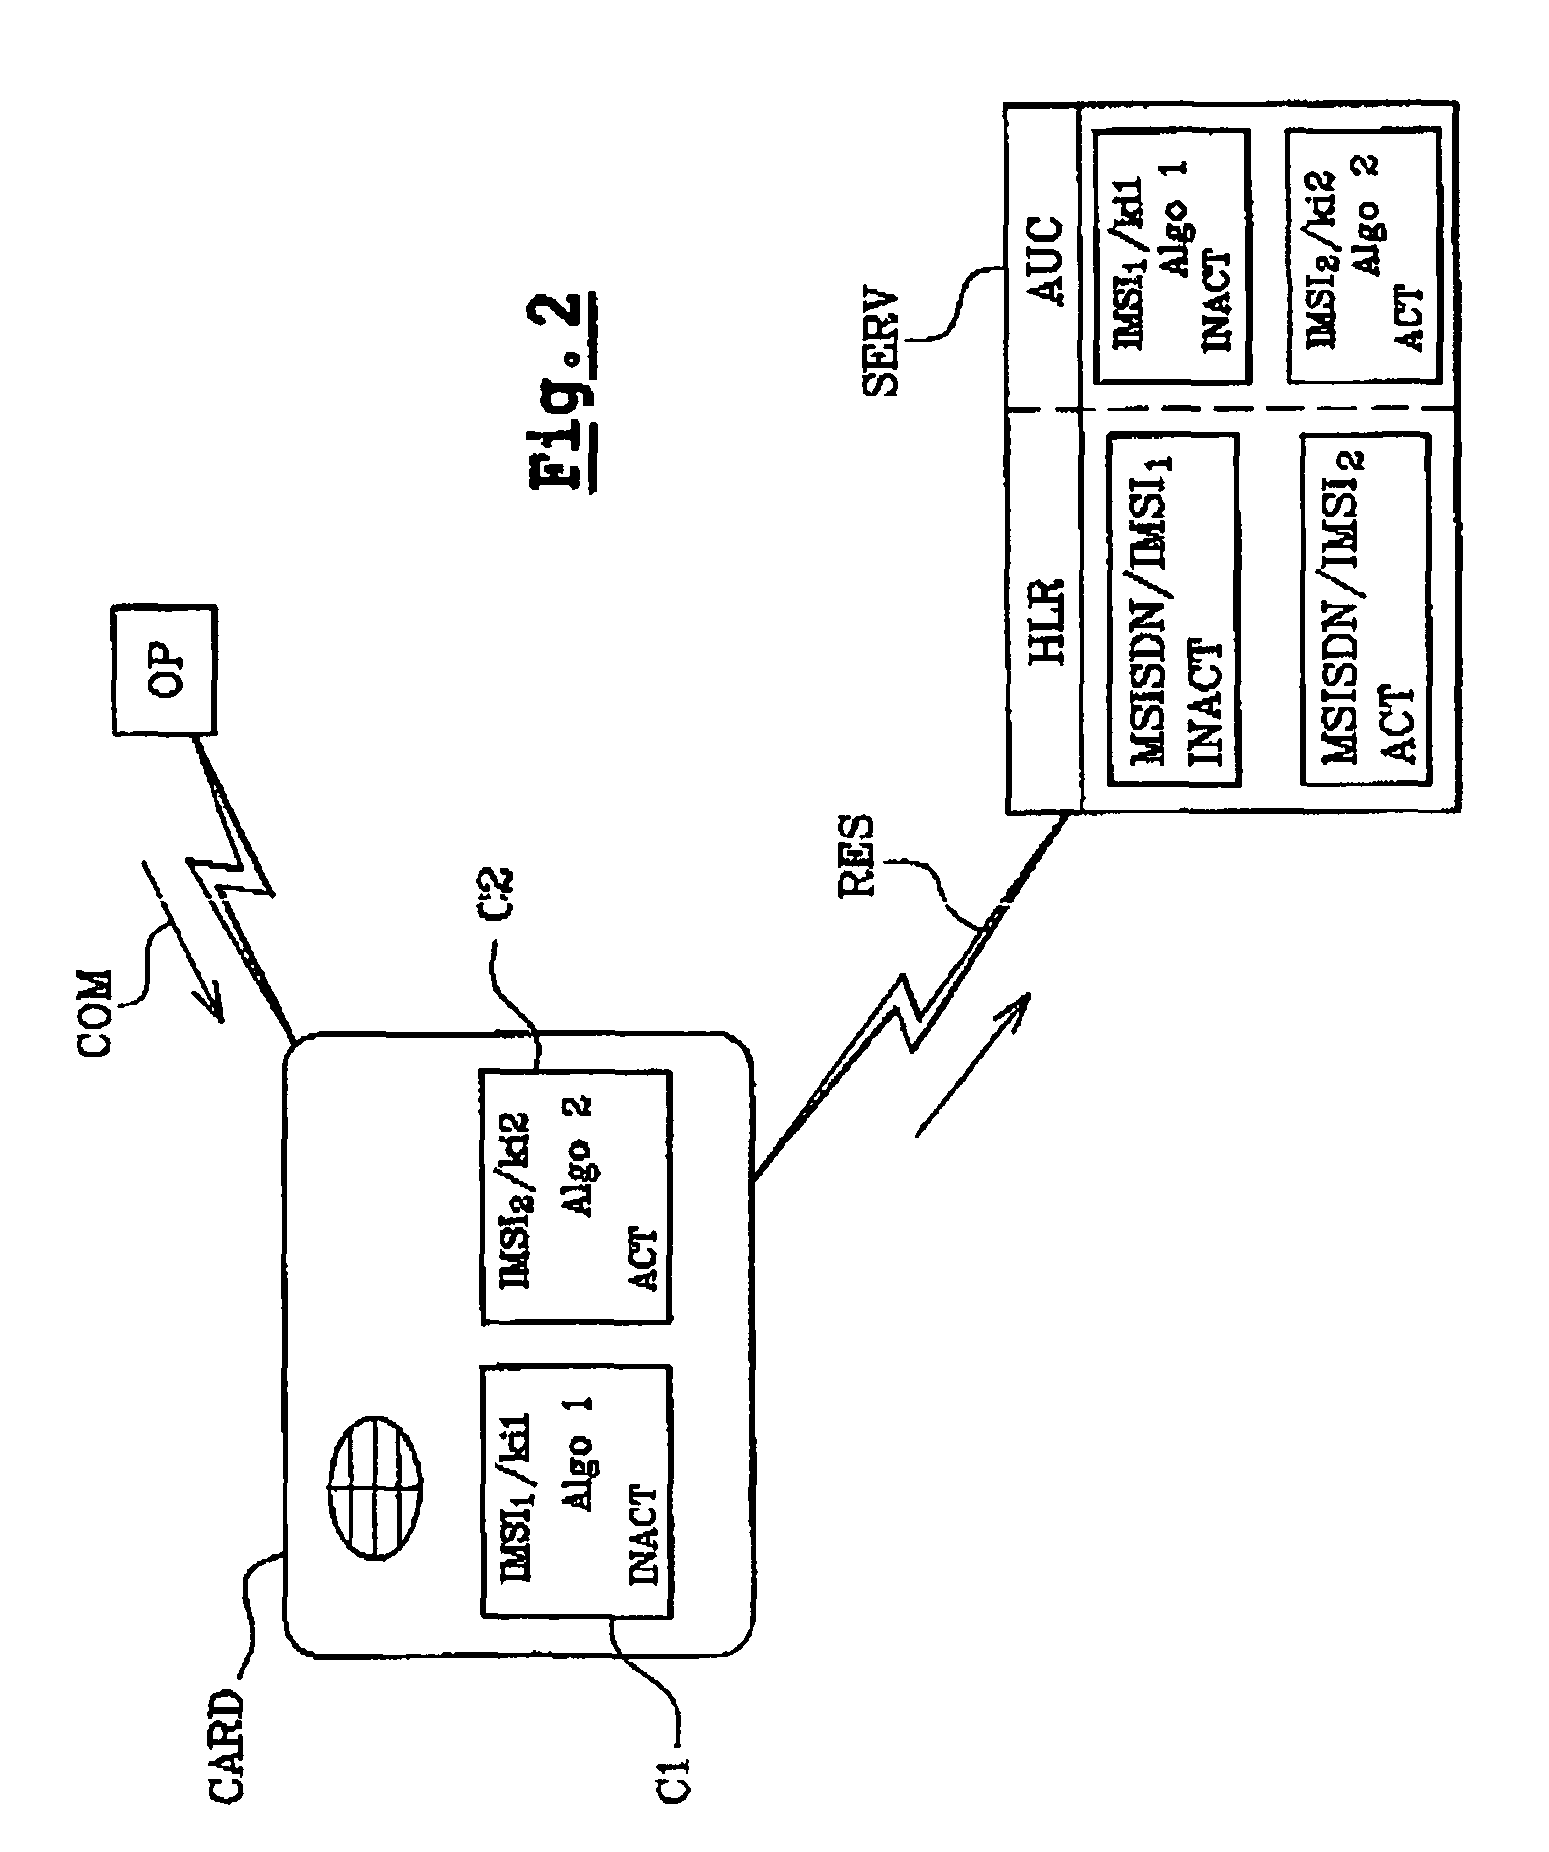 Method of updating an authentication algorithm in a computer system